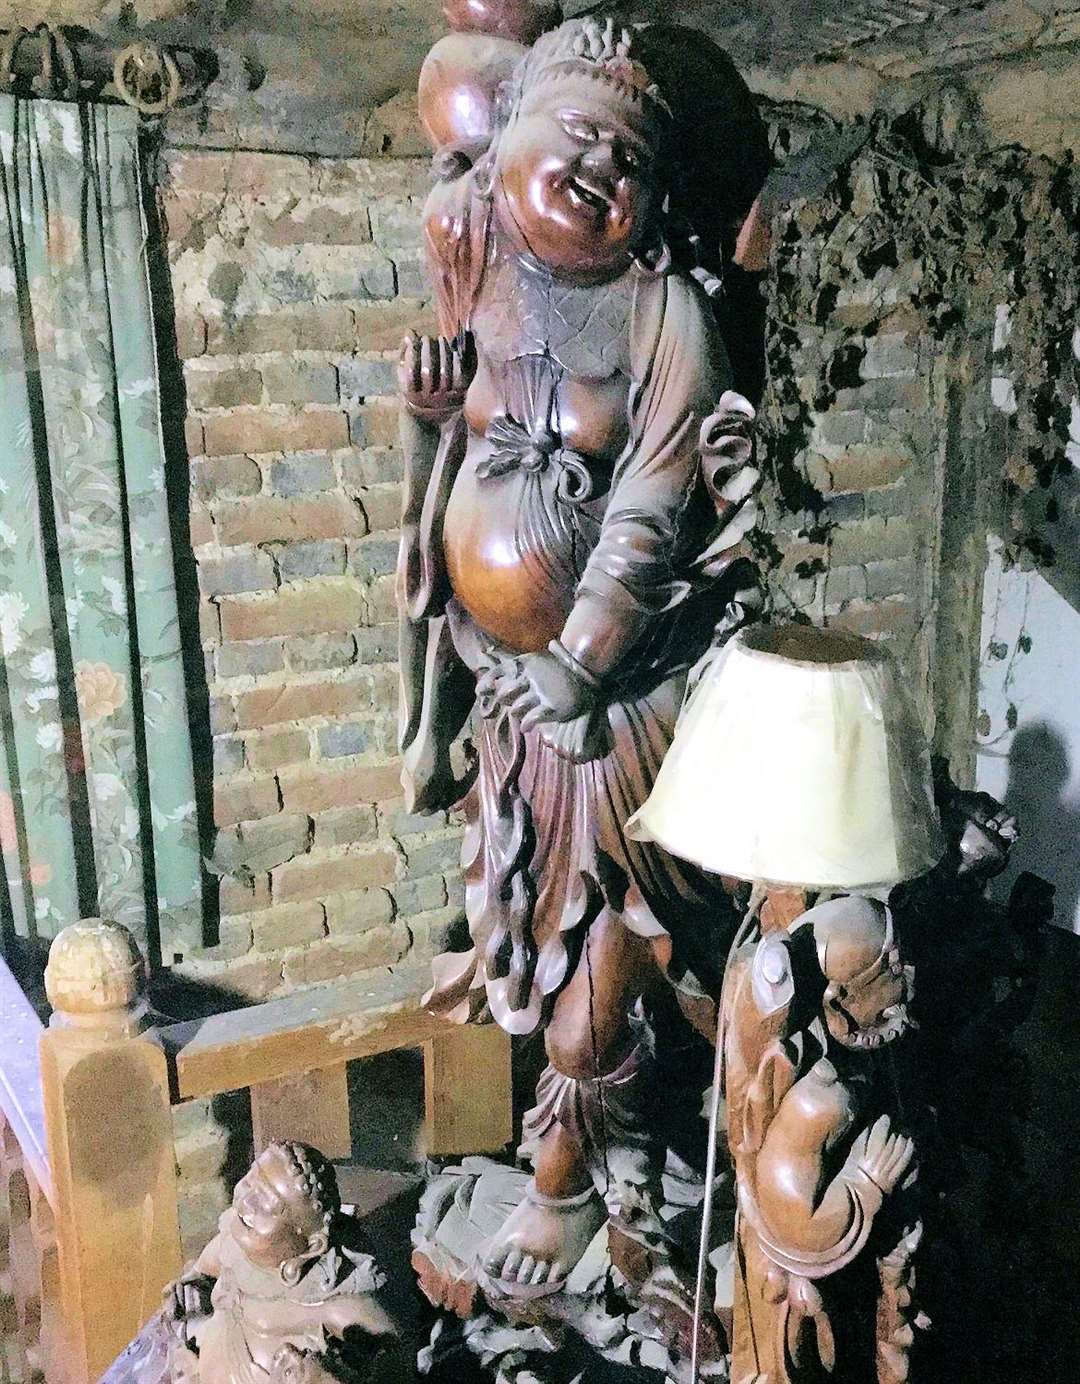 Antiques were stolen from a home in Hunton (8346409)